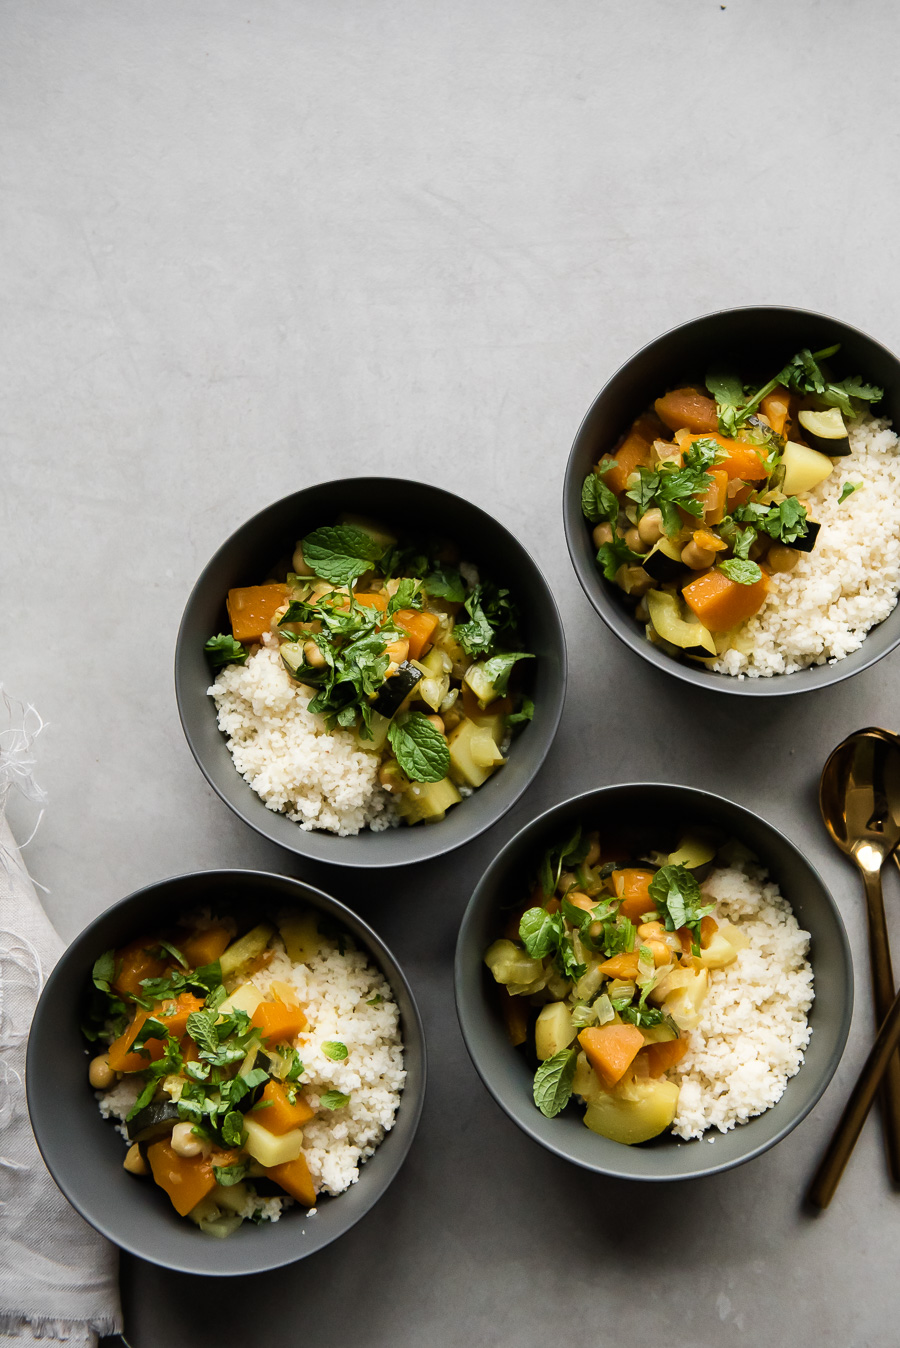 Moroccan Vegetable Stew with Couscous